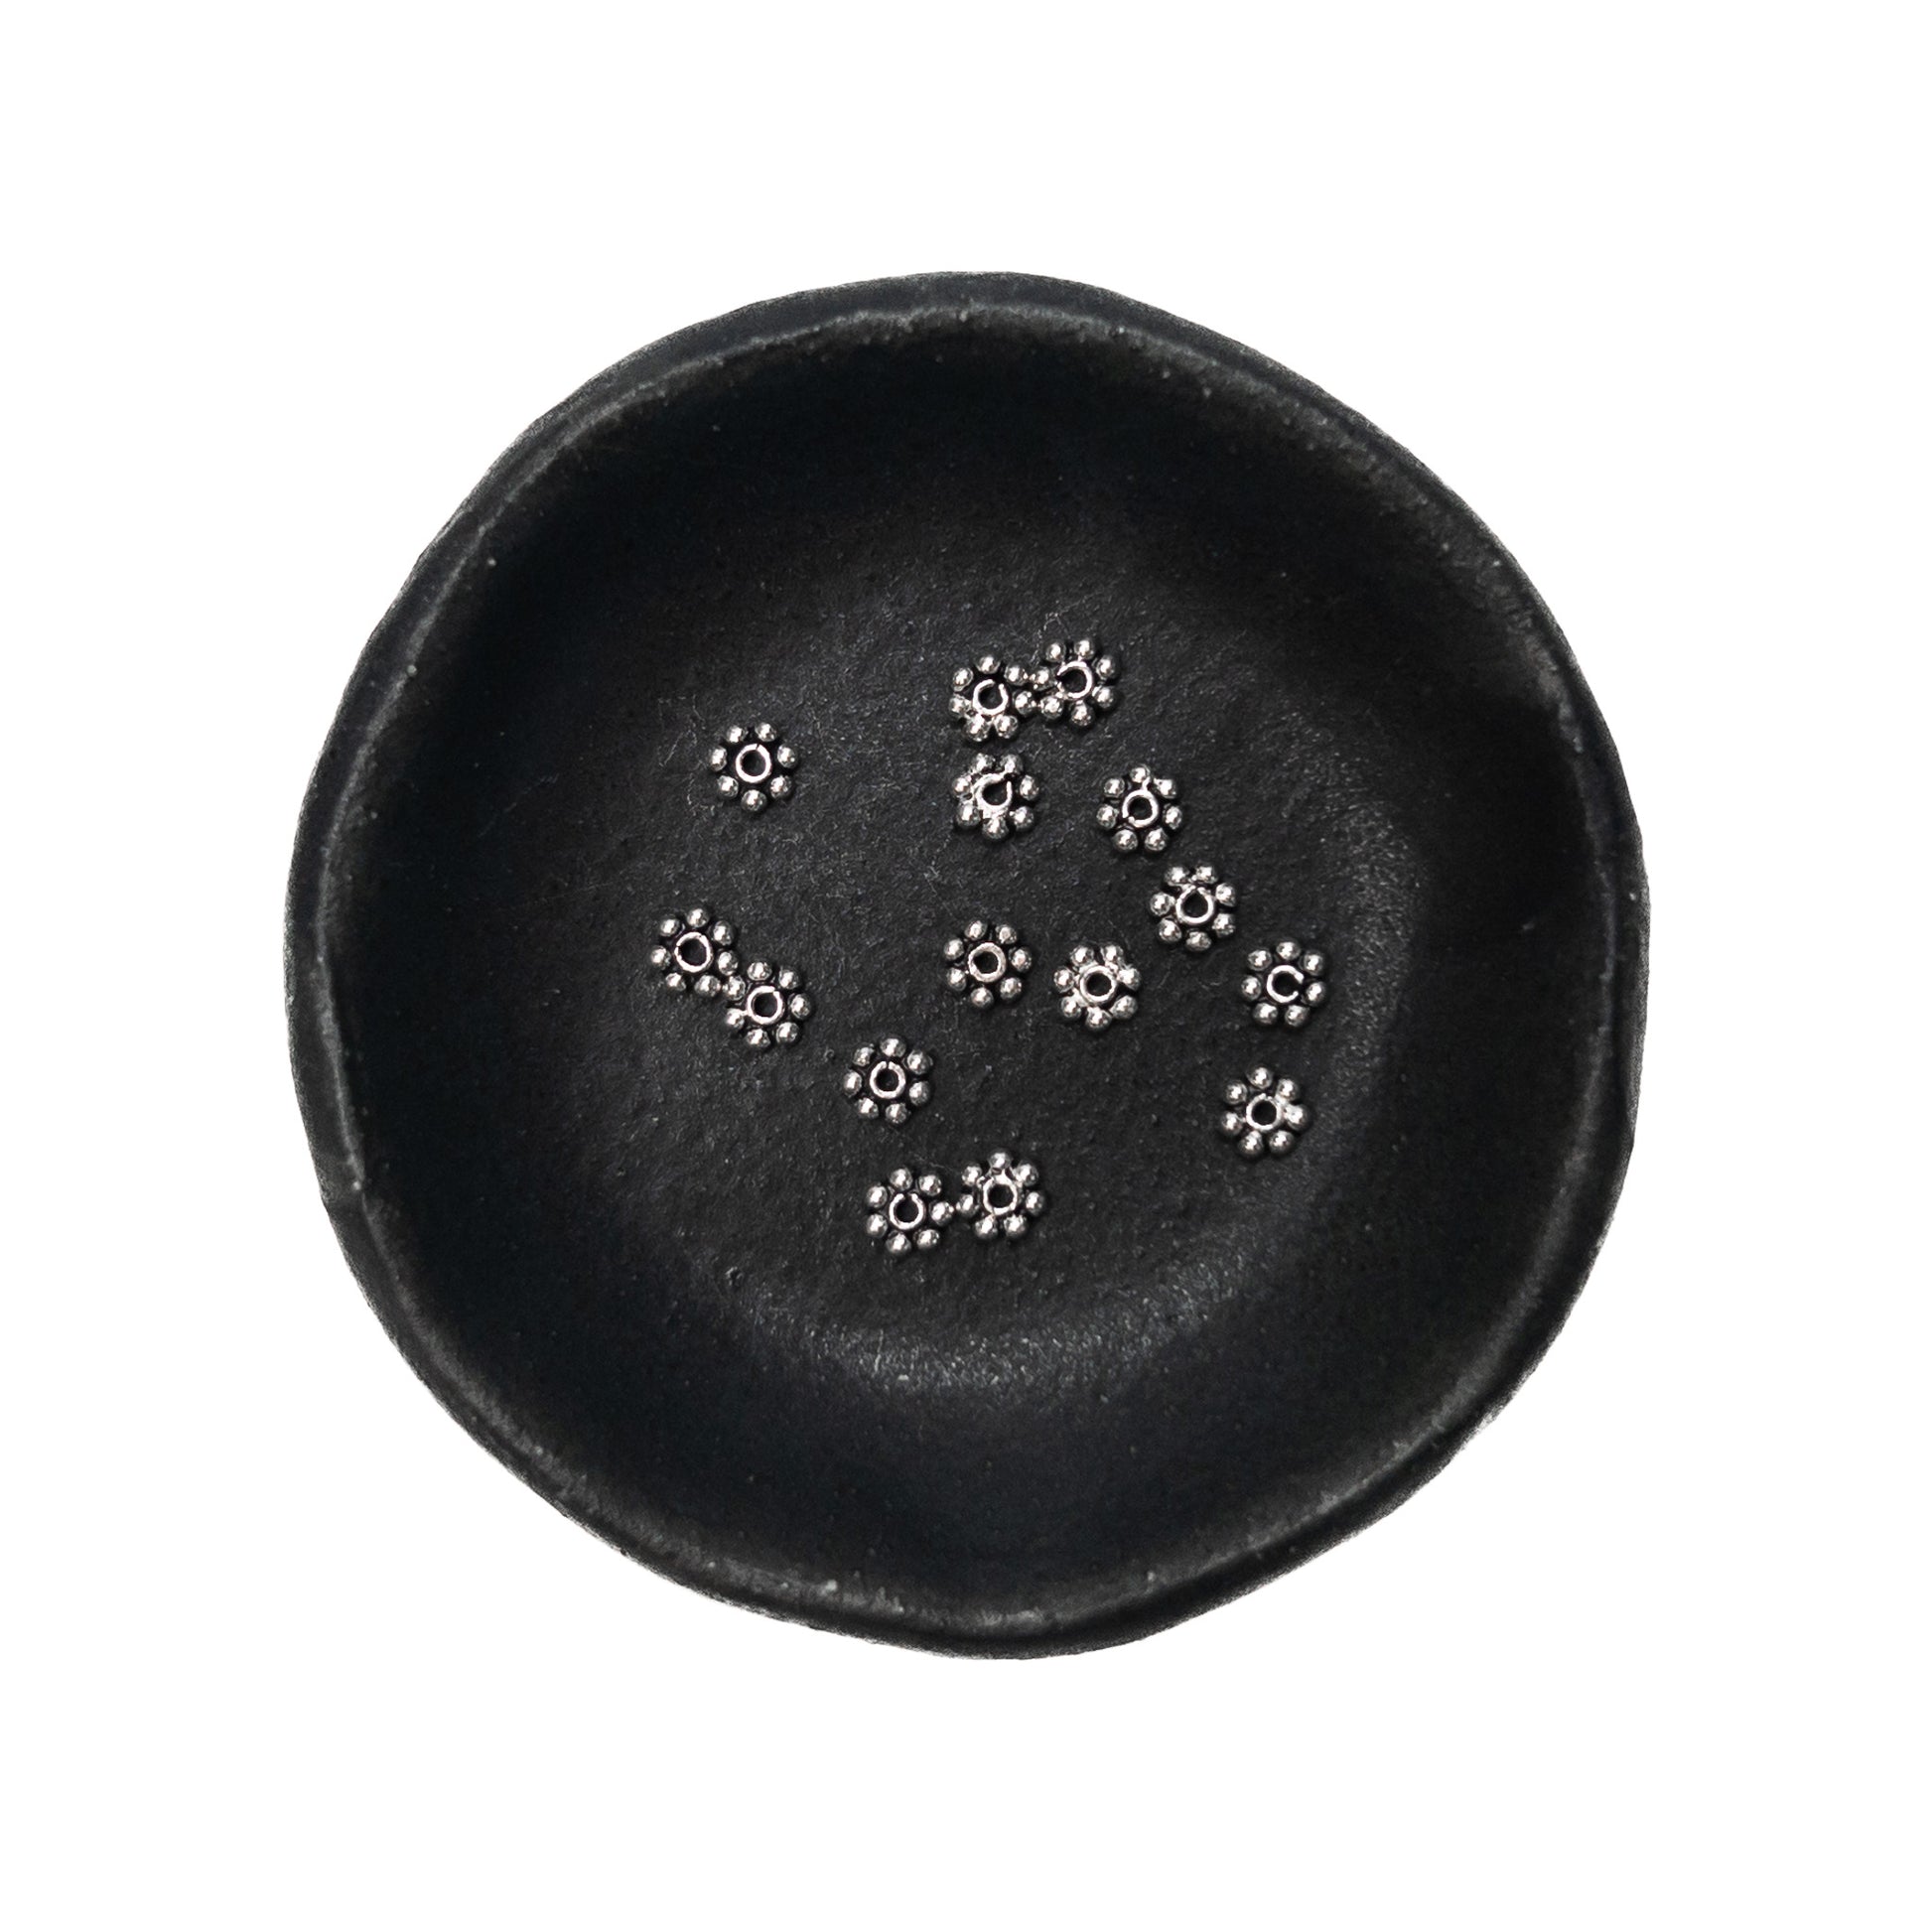 Daisy Spacer 4mm (Oxidized Sterling Silver) - 15 pcs.